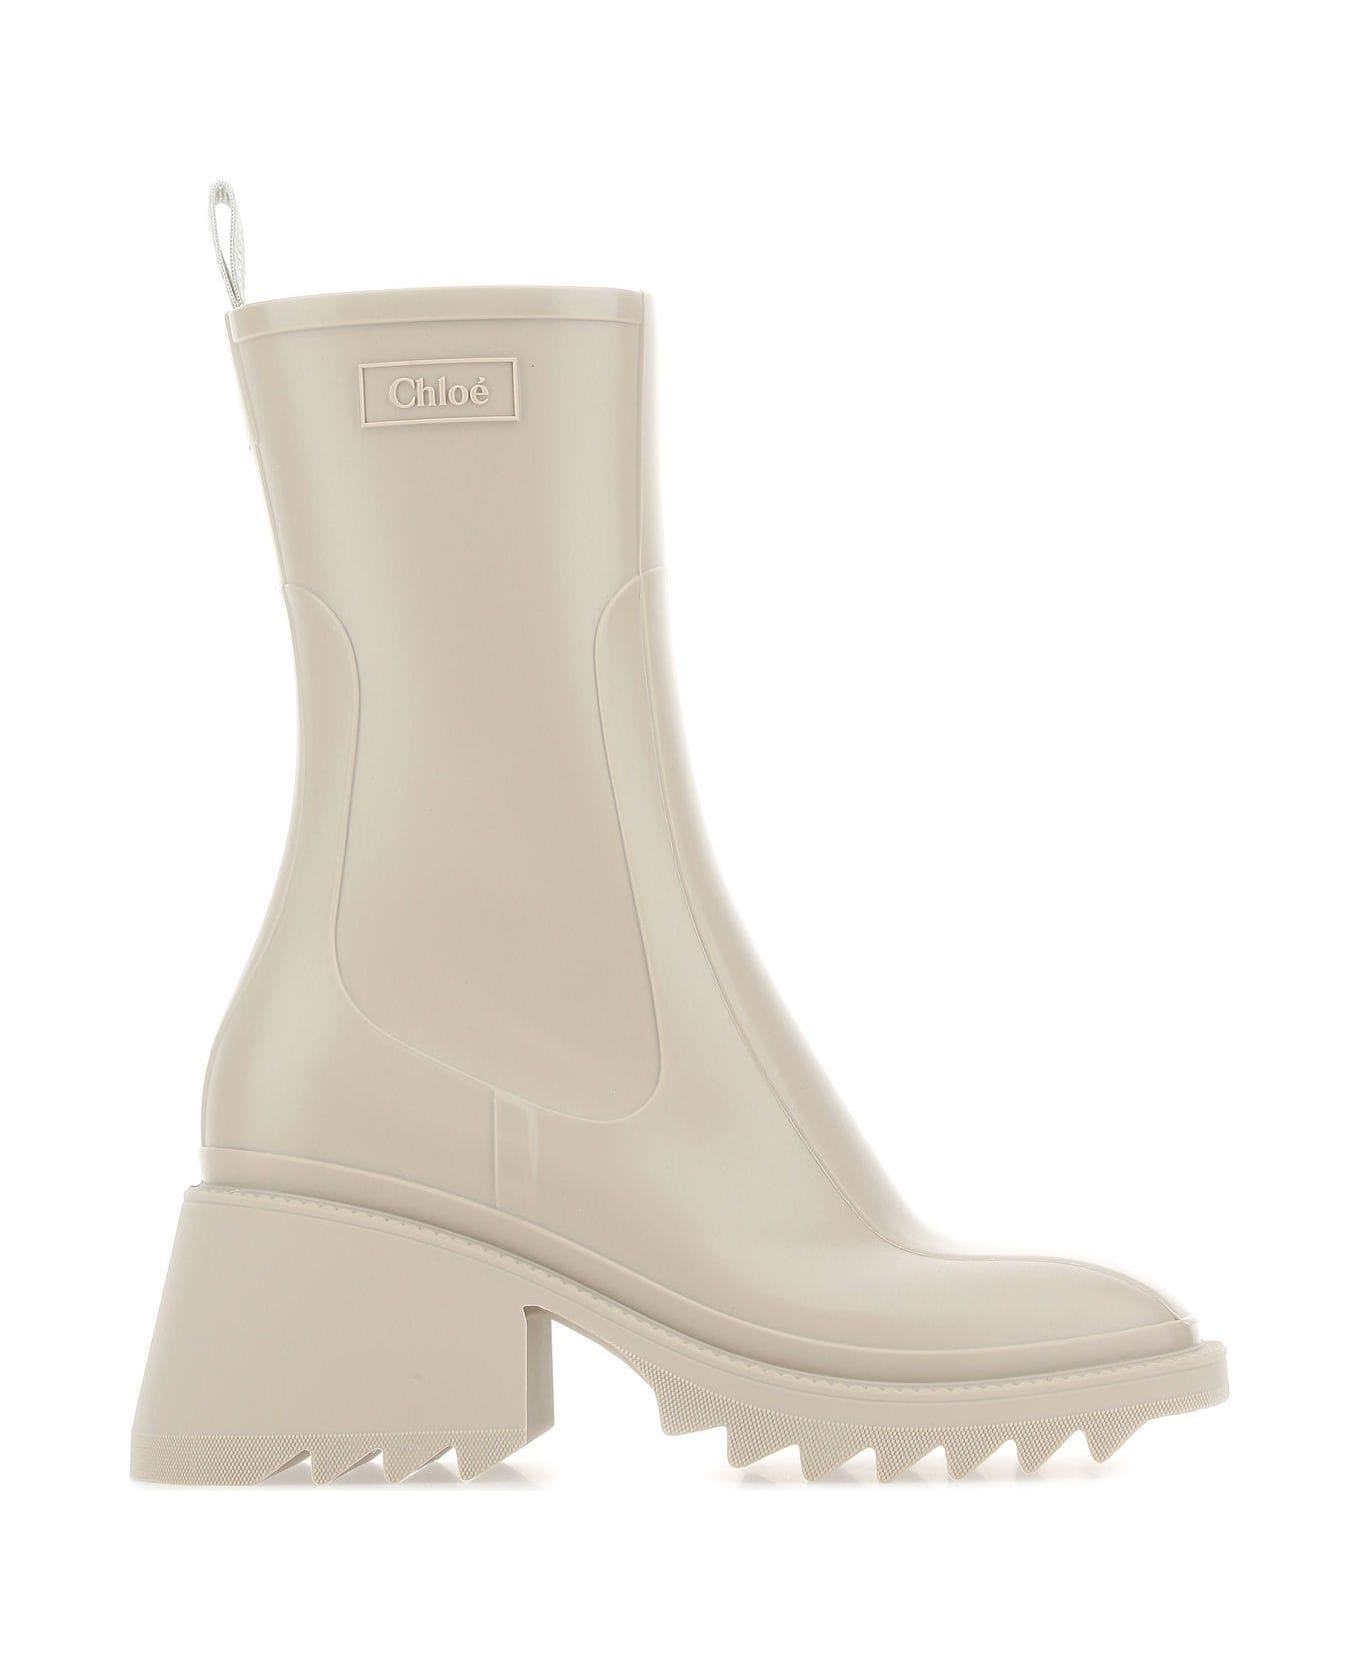 Chloé Dove Grey Rubber Ankle Boots - Nomad beige